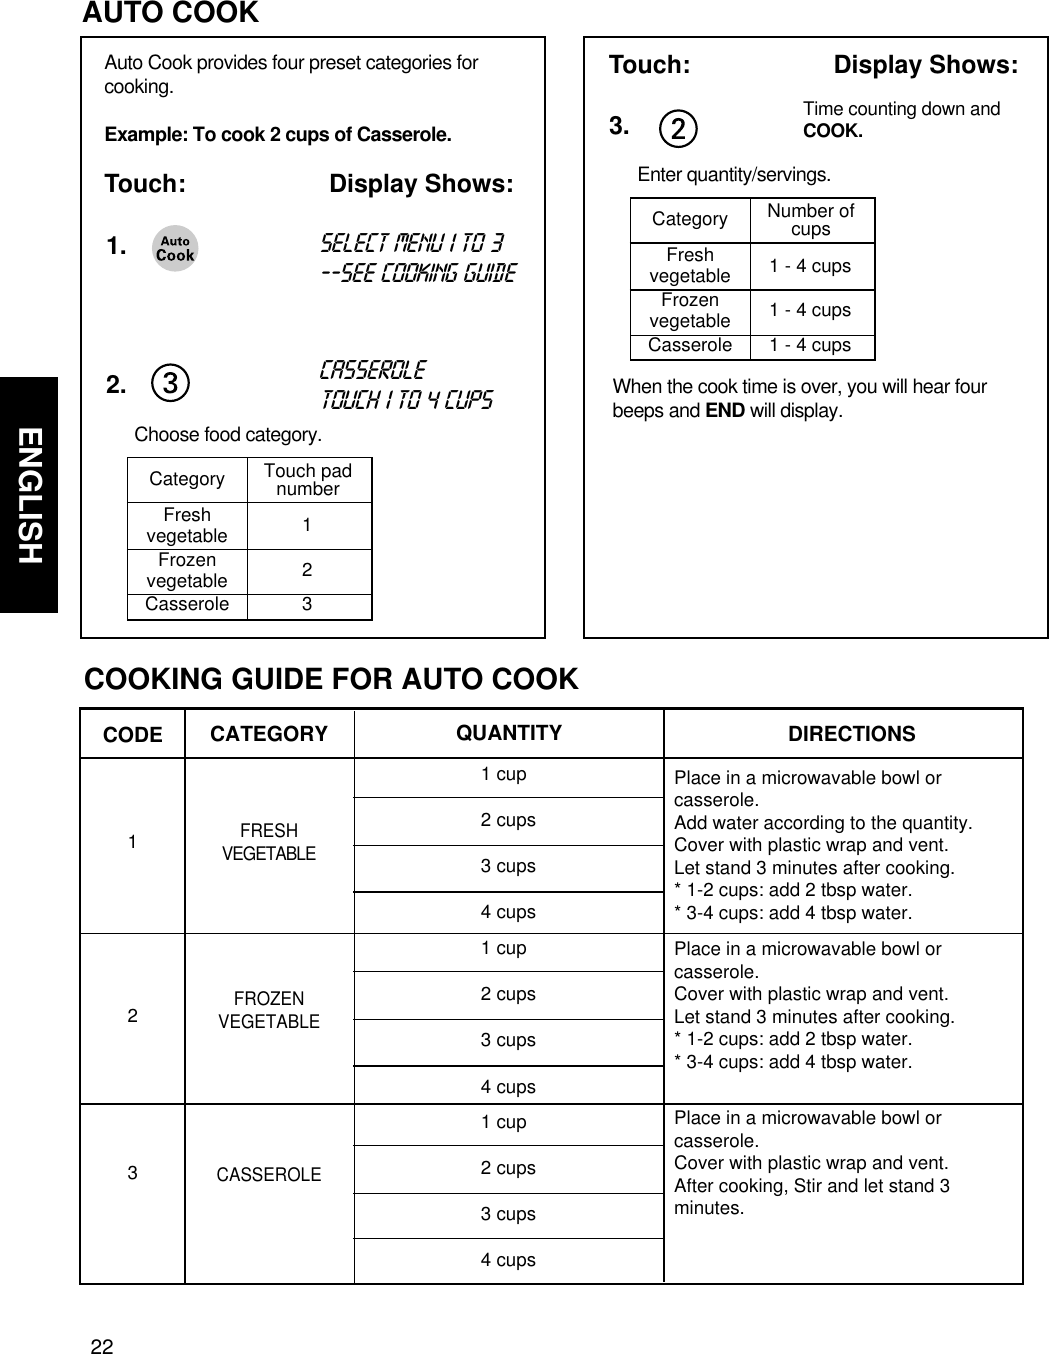 22ENGLISHUSING YOUR MICROWAVE OVEN    AUTO COOKCOOKING GUIDE FOR AUTO COOK1.2.Auto Cook provides four preset categories forcooking.Example: To cook 2 cups of Casserole.Touch: Display Shows:Touch: Display Shows:select menu 1 to 3--see cooking guidecasseroletouch 1 to 4 cupsChoose food category.CATEGORYCODE QUANTITYDIRECTIONSFRESHVEGETABLEFROZENVEGETABLECASSEROLE123Place in a microwavable bowl orcasserole. Add water according to the quantity. Cover with plastic wrap and vent. Let stand 3 minutes after cooking.* 1-2 cups: add 2 tbsp water.* 3-4 cups: add 4 tbsp water.Place in a microwavable bowl orcasserole. Cover with plastic wrap and vent. Let stand 3 minutes after cooking.* 1-2 cups: add 2 tbsp water.* 3-4 cups: add 4 tbsp water.Place in a microwavable bowl orcasserole. Cover with plastic wrap and vent. After cooking, Stir and let stand 3minutes.1 cup2 cups3 cups4 cups1 cup2 cups3 cups4 cups1 cup2 cups3 cups4 cupsCategory Touch padnumber123FreshvegetableFrozenvegetableCasserole3.Enter quantity/servings.Category Number ofcups1 - 4 cups1 - 4 cups1 - 4 cupsFreshvegetableFrozenvegetableCasseroleTime counting down andCOOK.When the cook time is over, you will hear fourbeeps and END will display.